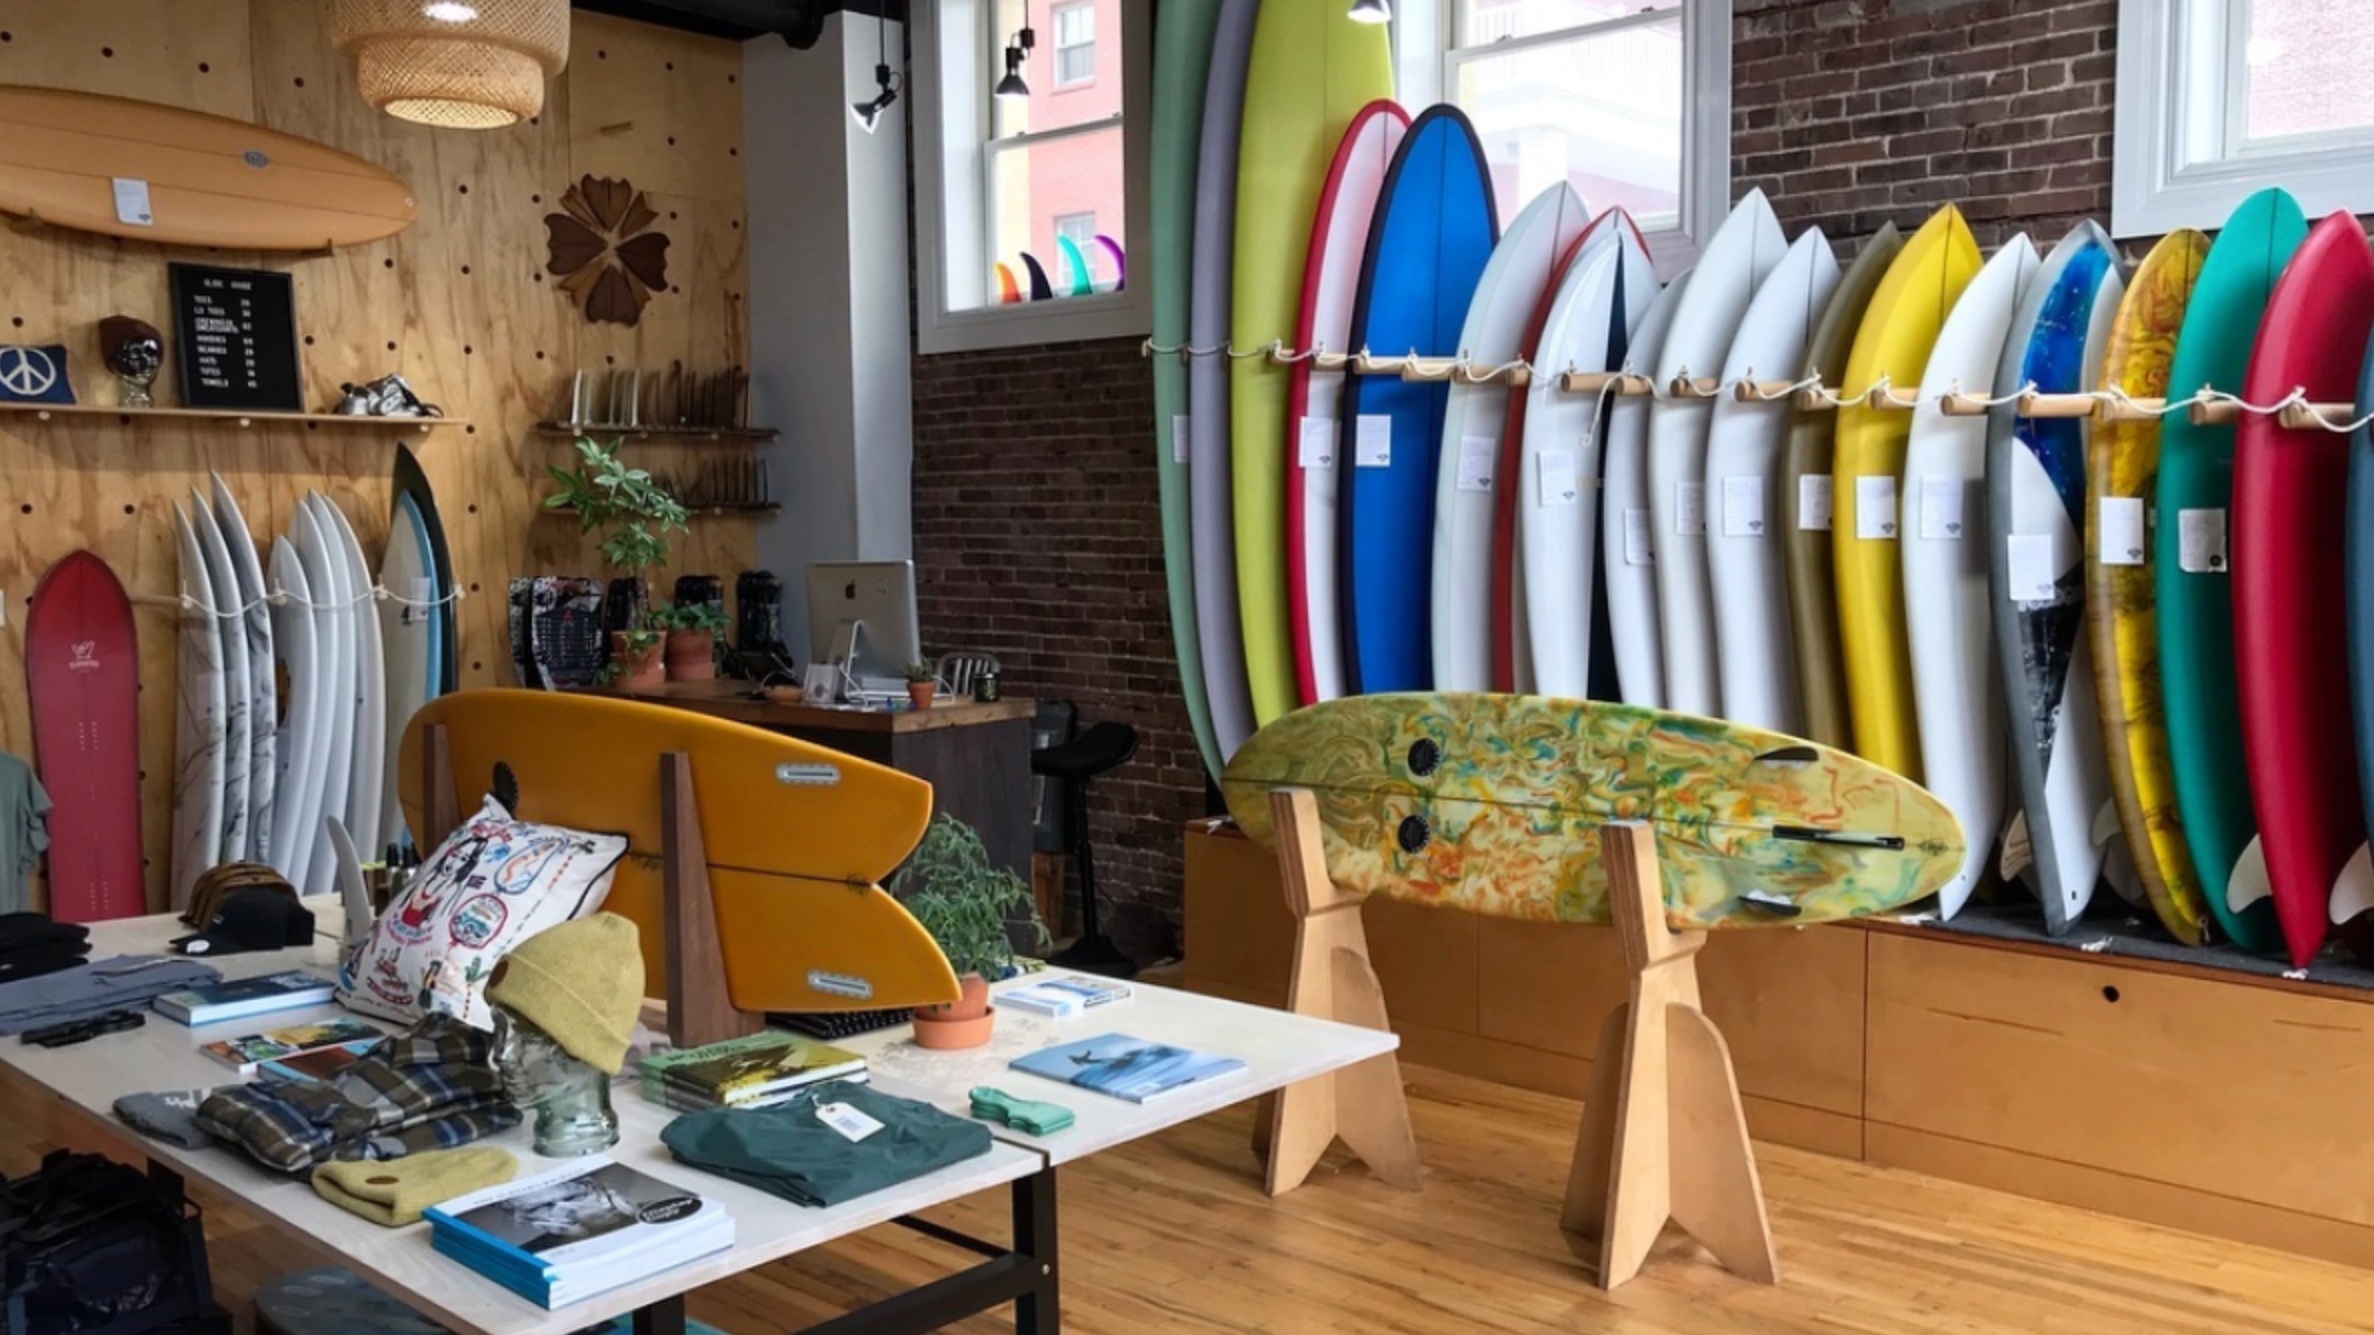 Surf Glide Co - 520 Bangs Ave, Asbury Park, NJ 07712Glide Surf Co. is a surf lifestyle store located in historic downtown Asbury Park, NJ.WEBSITE